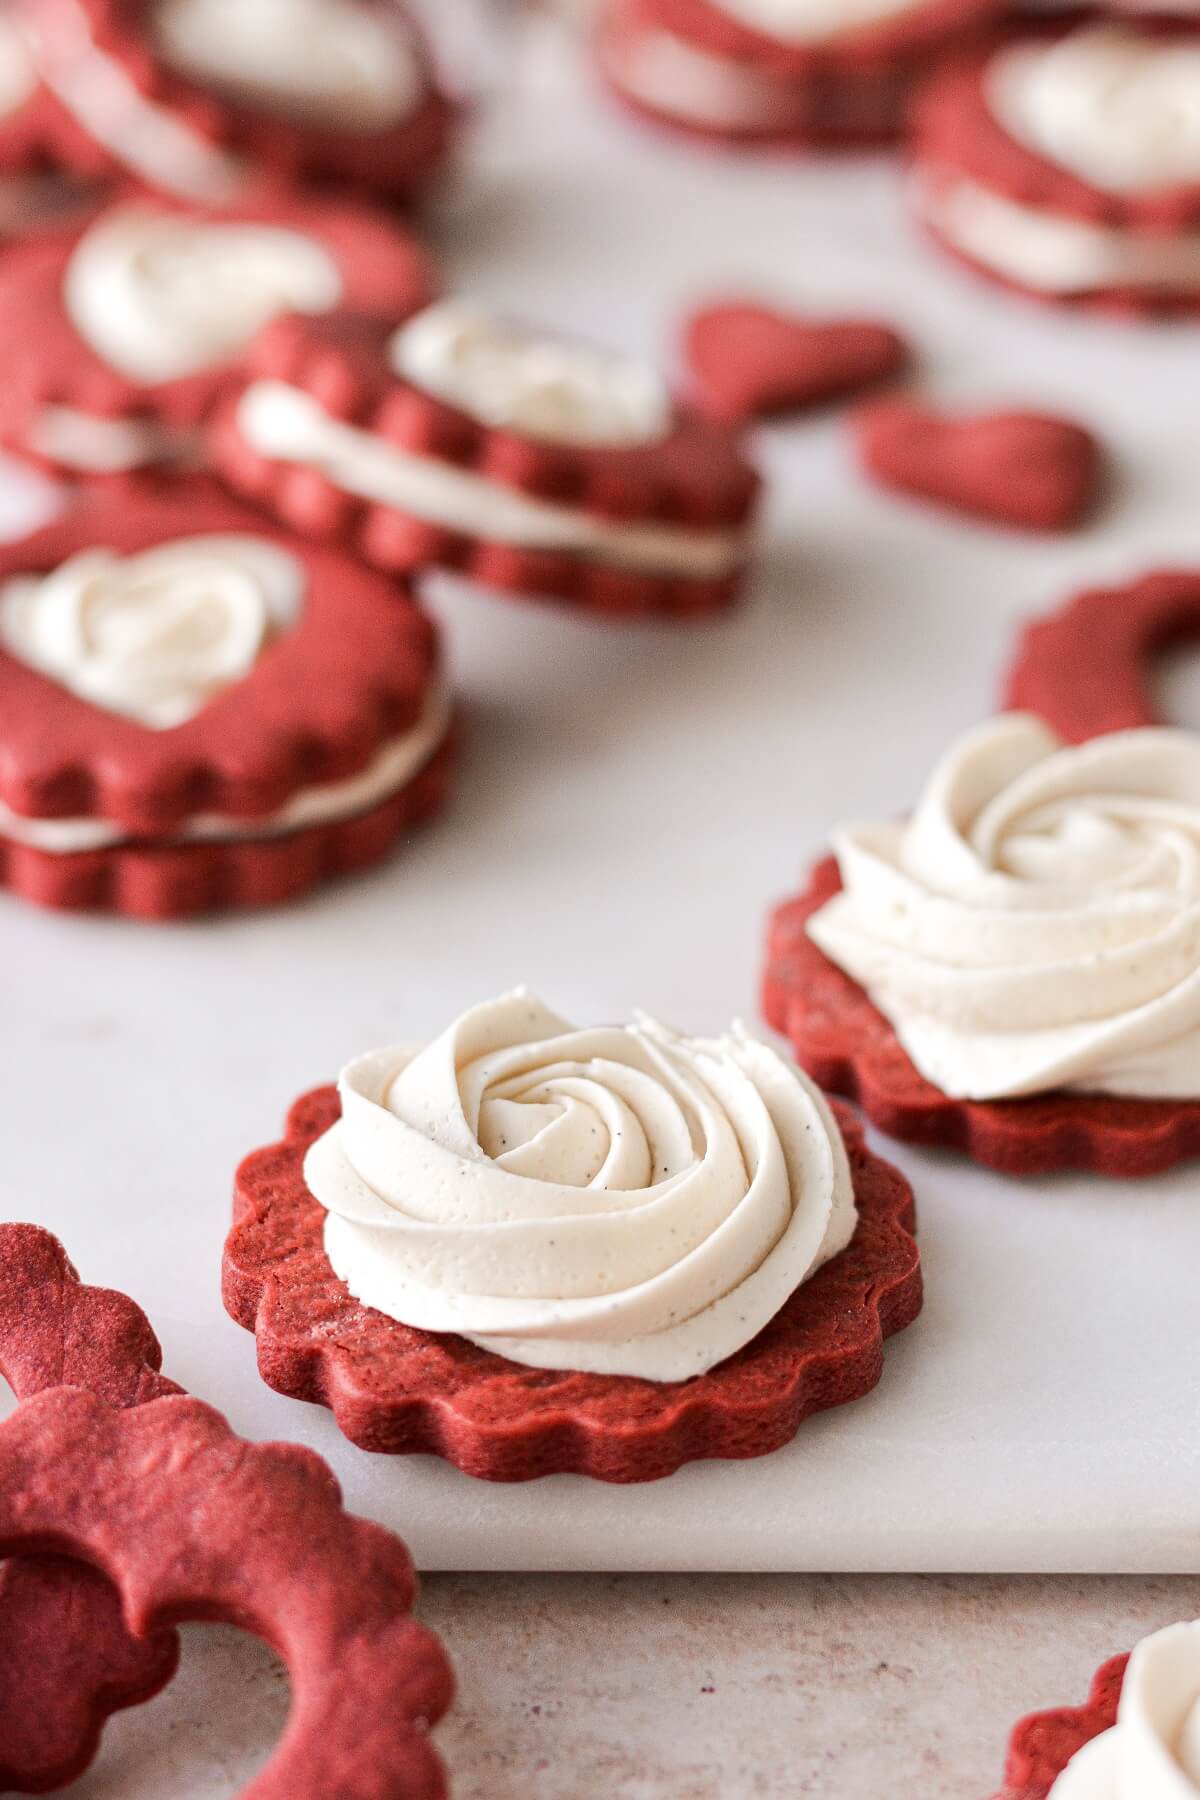 A swirl of buttercream on a red sugar cookie.